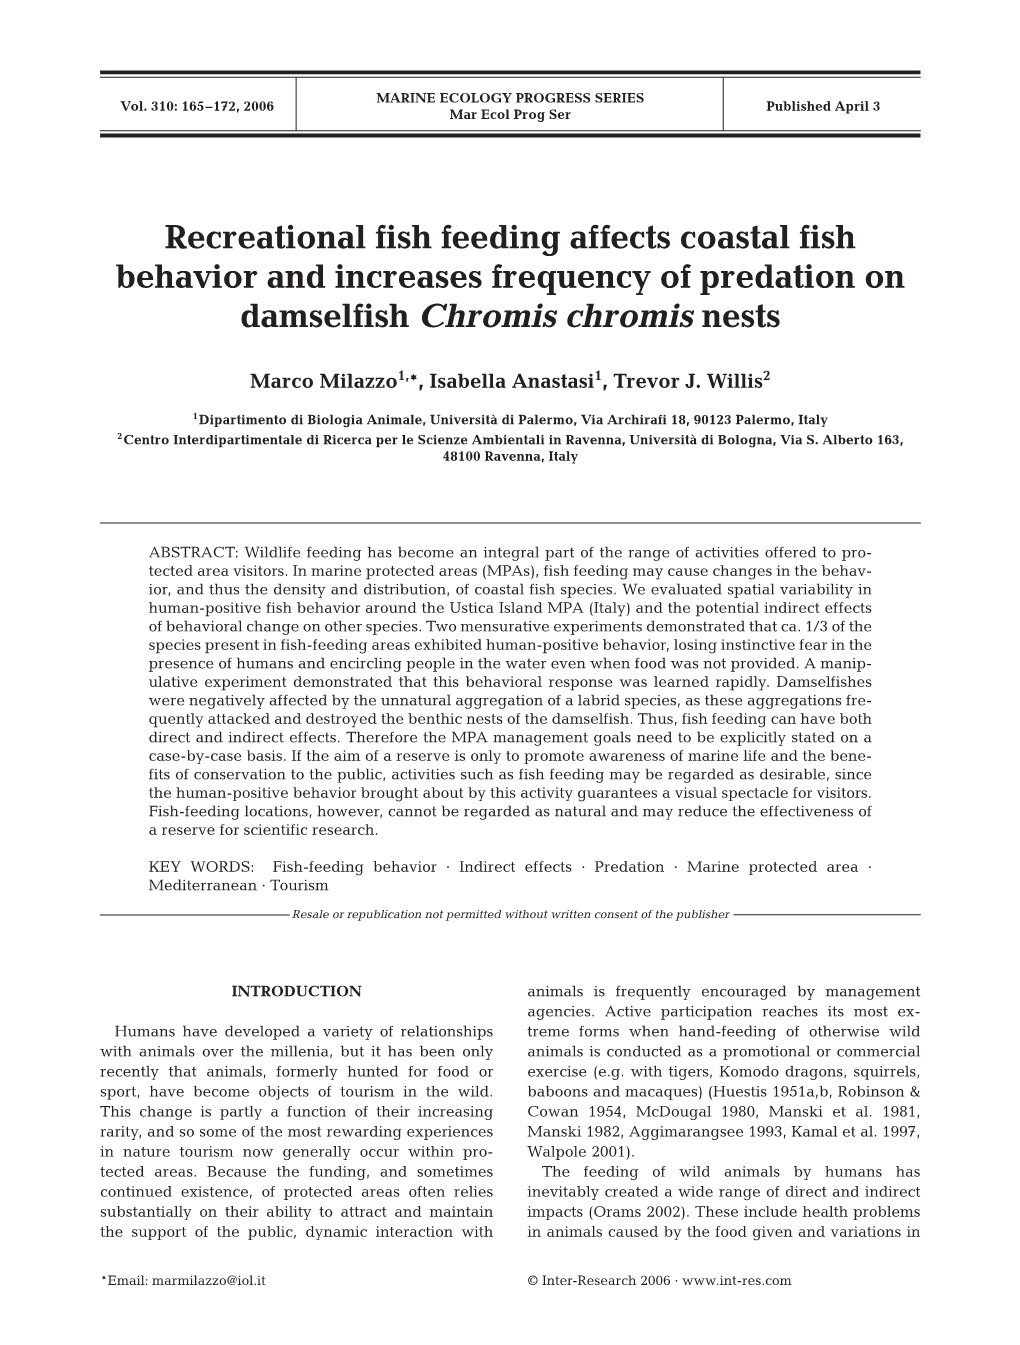 Recreational Fish Feeding Affects Coastal Fish Behavior and Increases Frequency of Predation on Damselfish Chromis Chromis Nests